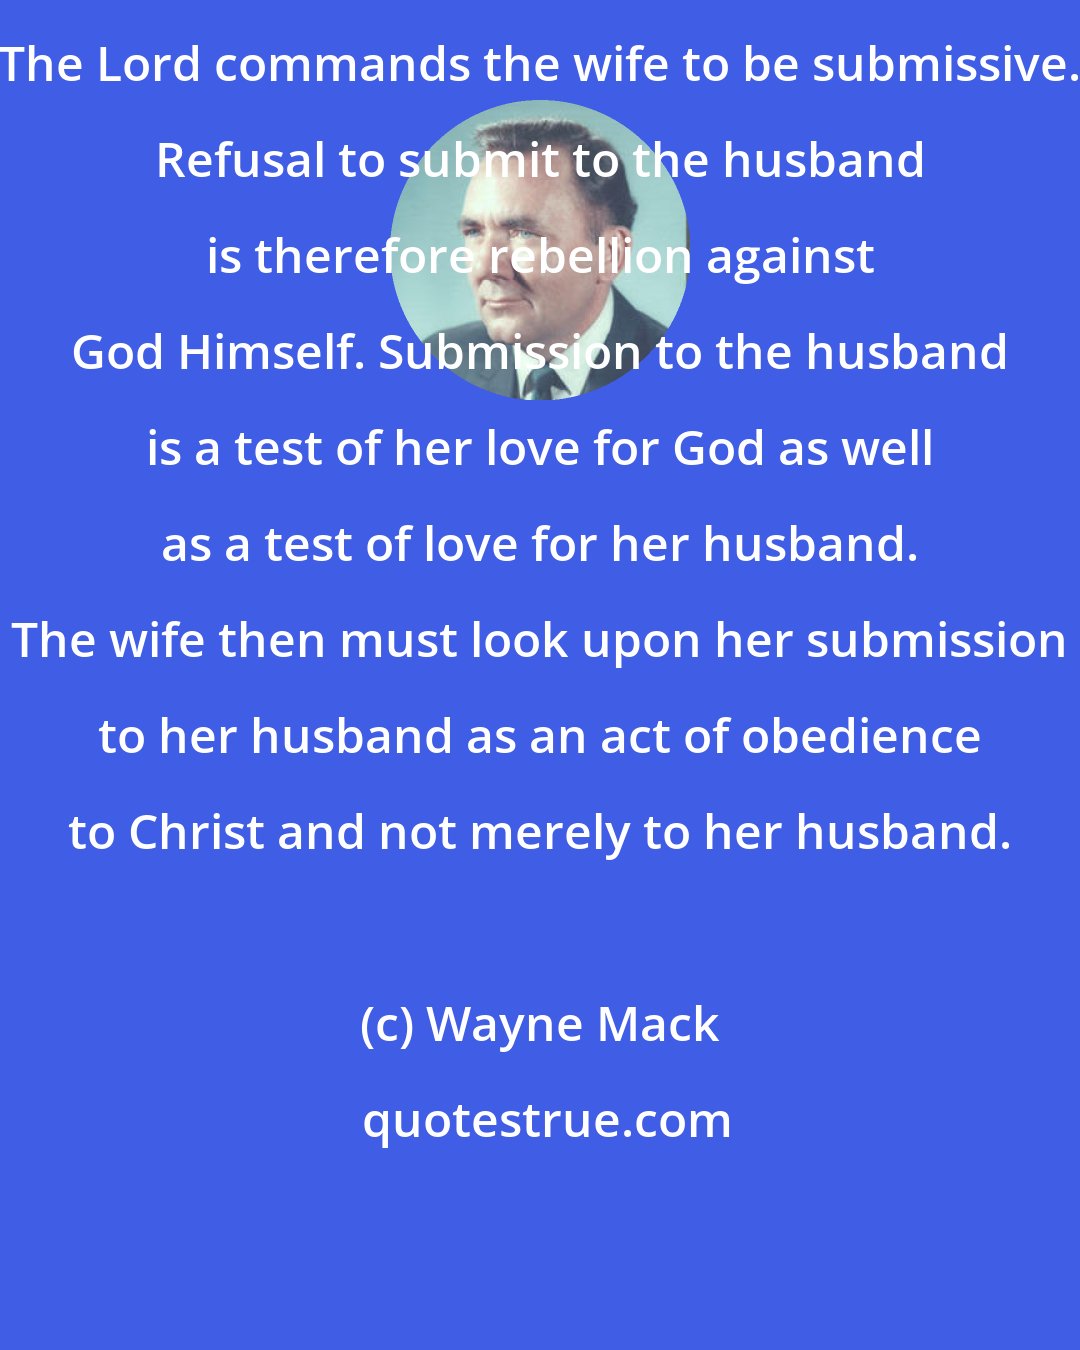 Wayne Mack: The Lord commands the wife to be submissive. Refusal to submit to the husband is therefore rebellion against God Himself. Submission to the husband is a test of her love for God as well as a test of love for her husband. The wife then must look upon her submission to her husband as an act of obedience to Christ and not merely to her husband.